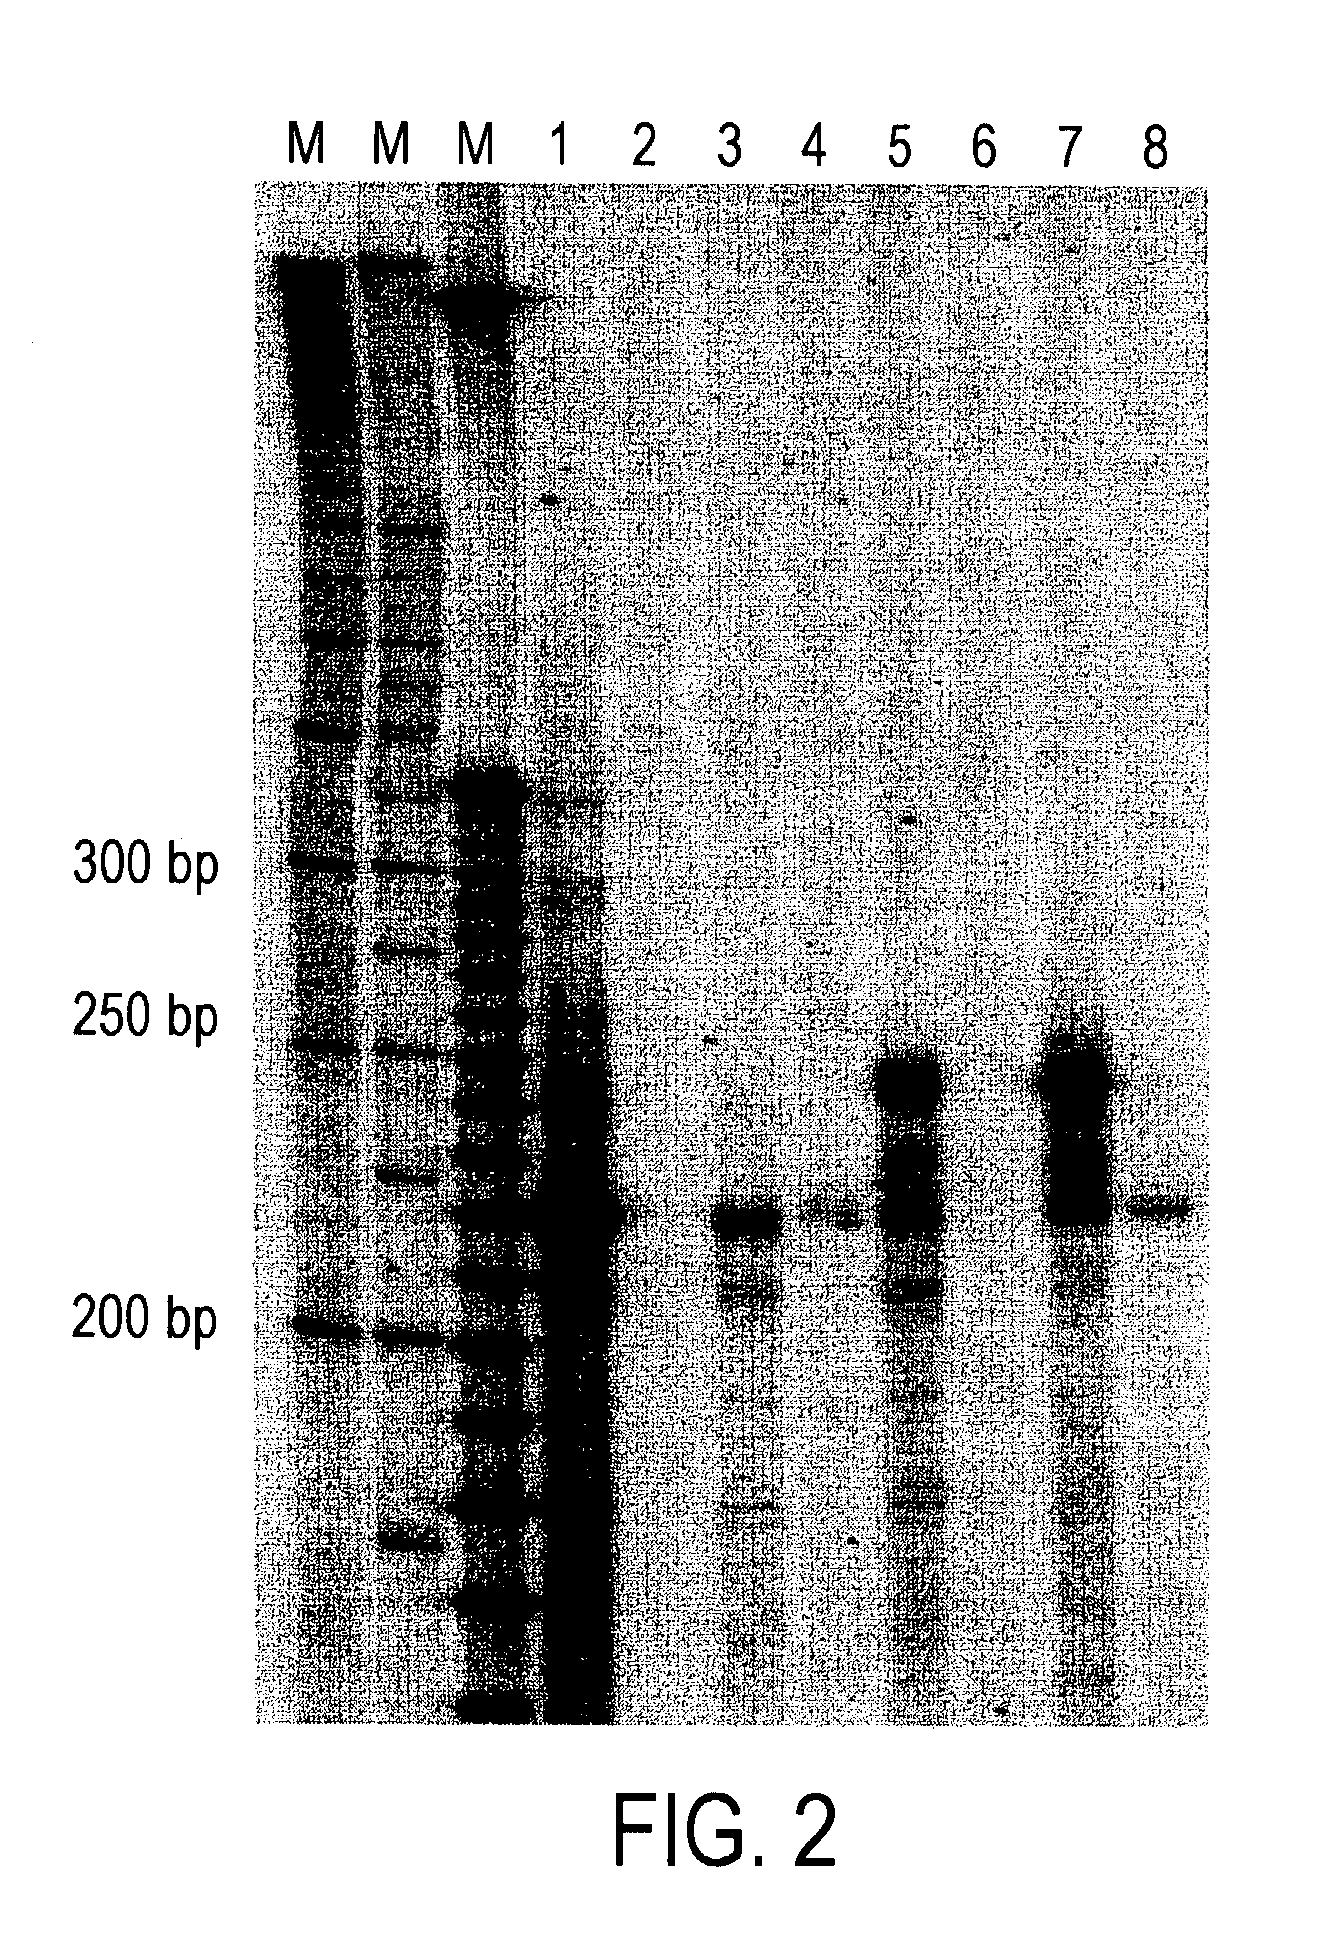 Method for identifying accessible binding sites on RNA